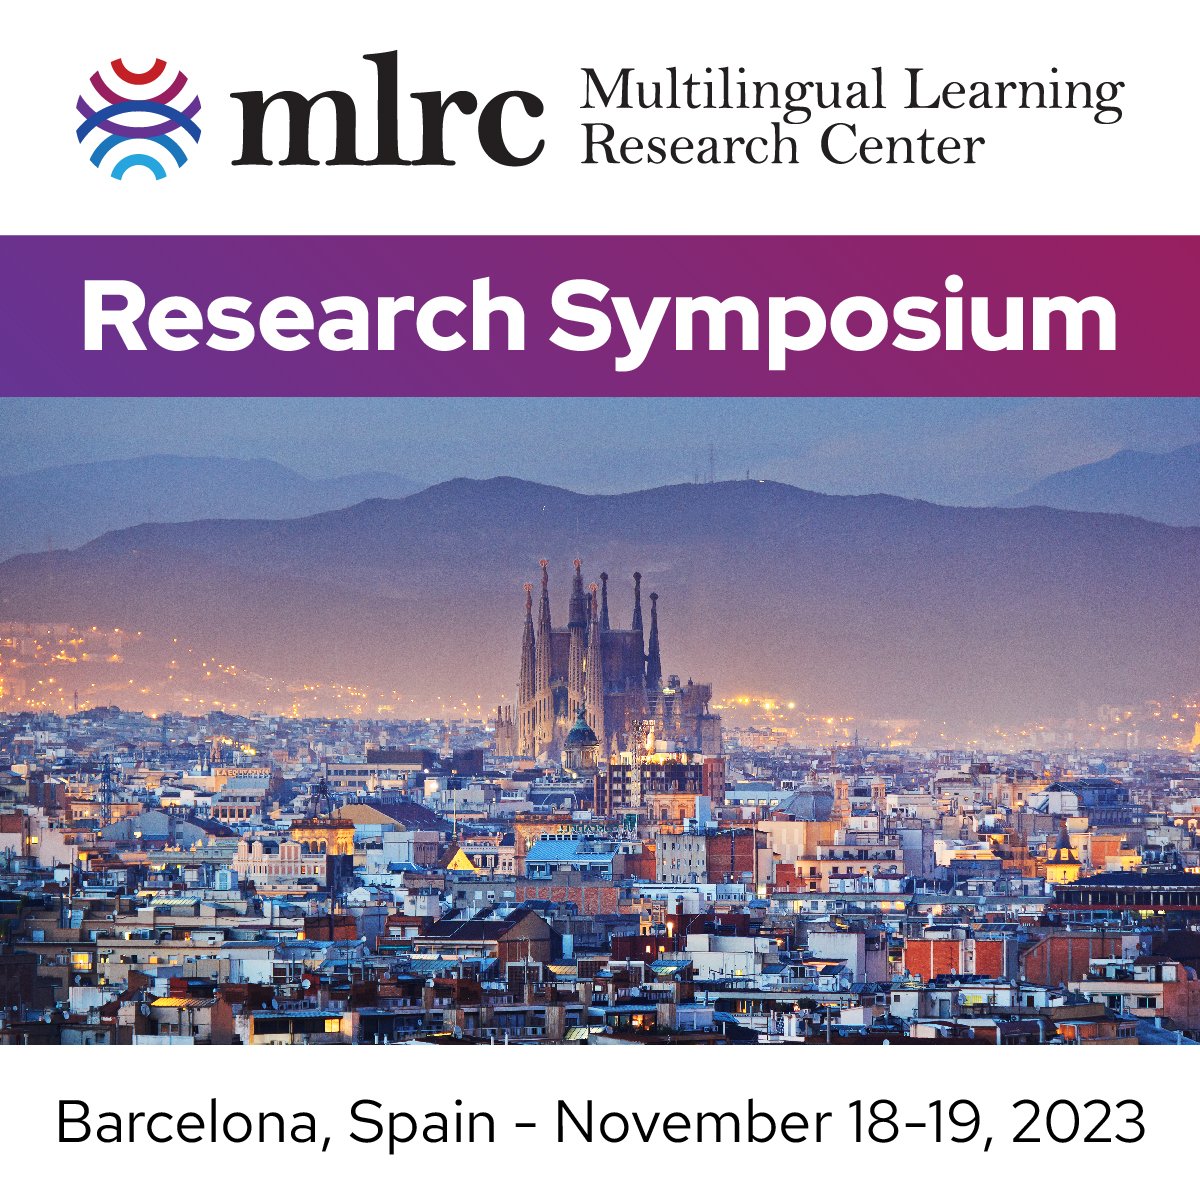 Early bird deadline approaching (Sept 1) for MLRC Research Symposium in Barcelona Nov 18-19 Reserve spots for your school team soon! mlrc.wisc.edu/event/research…